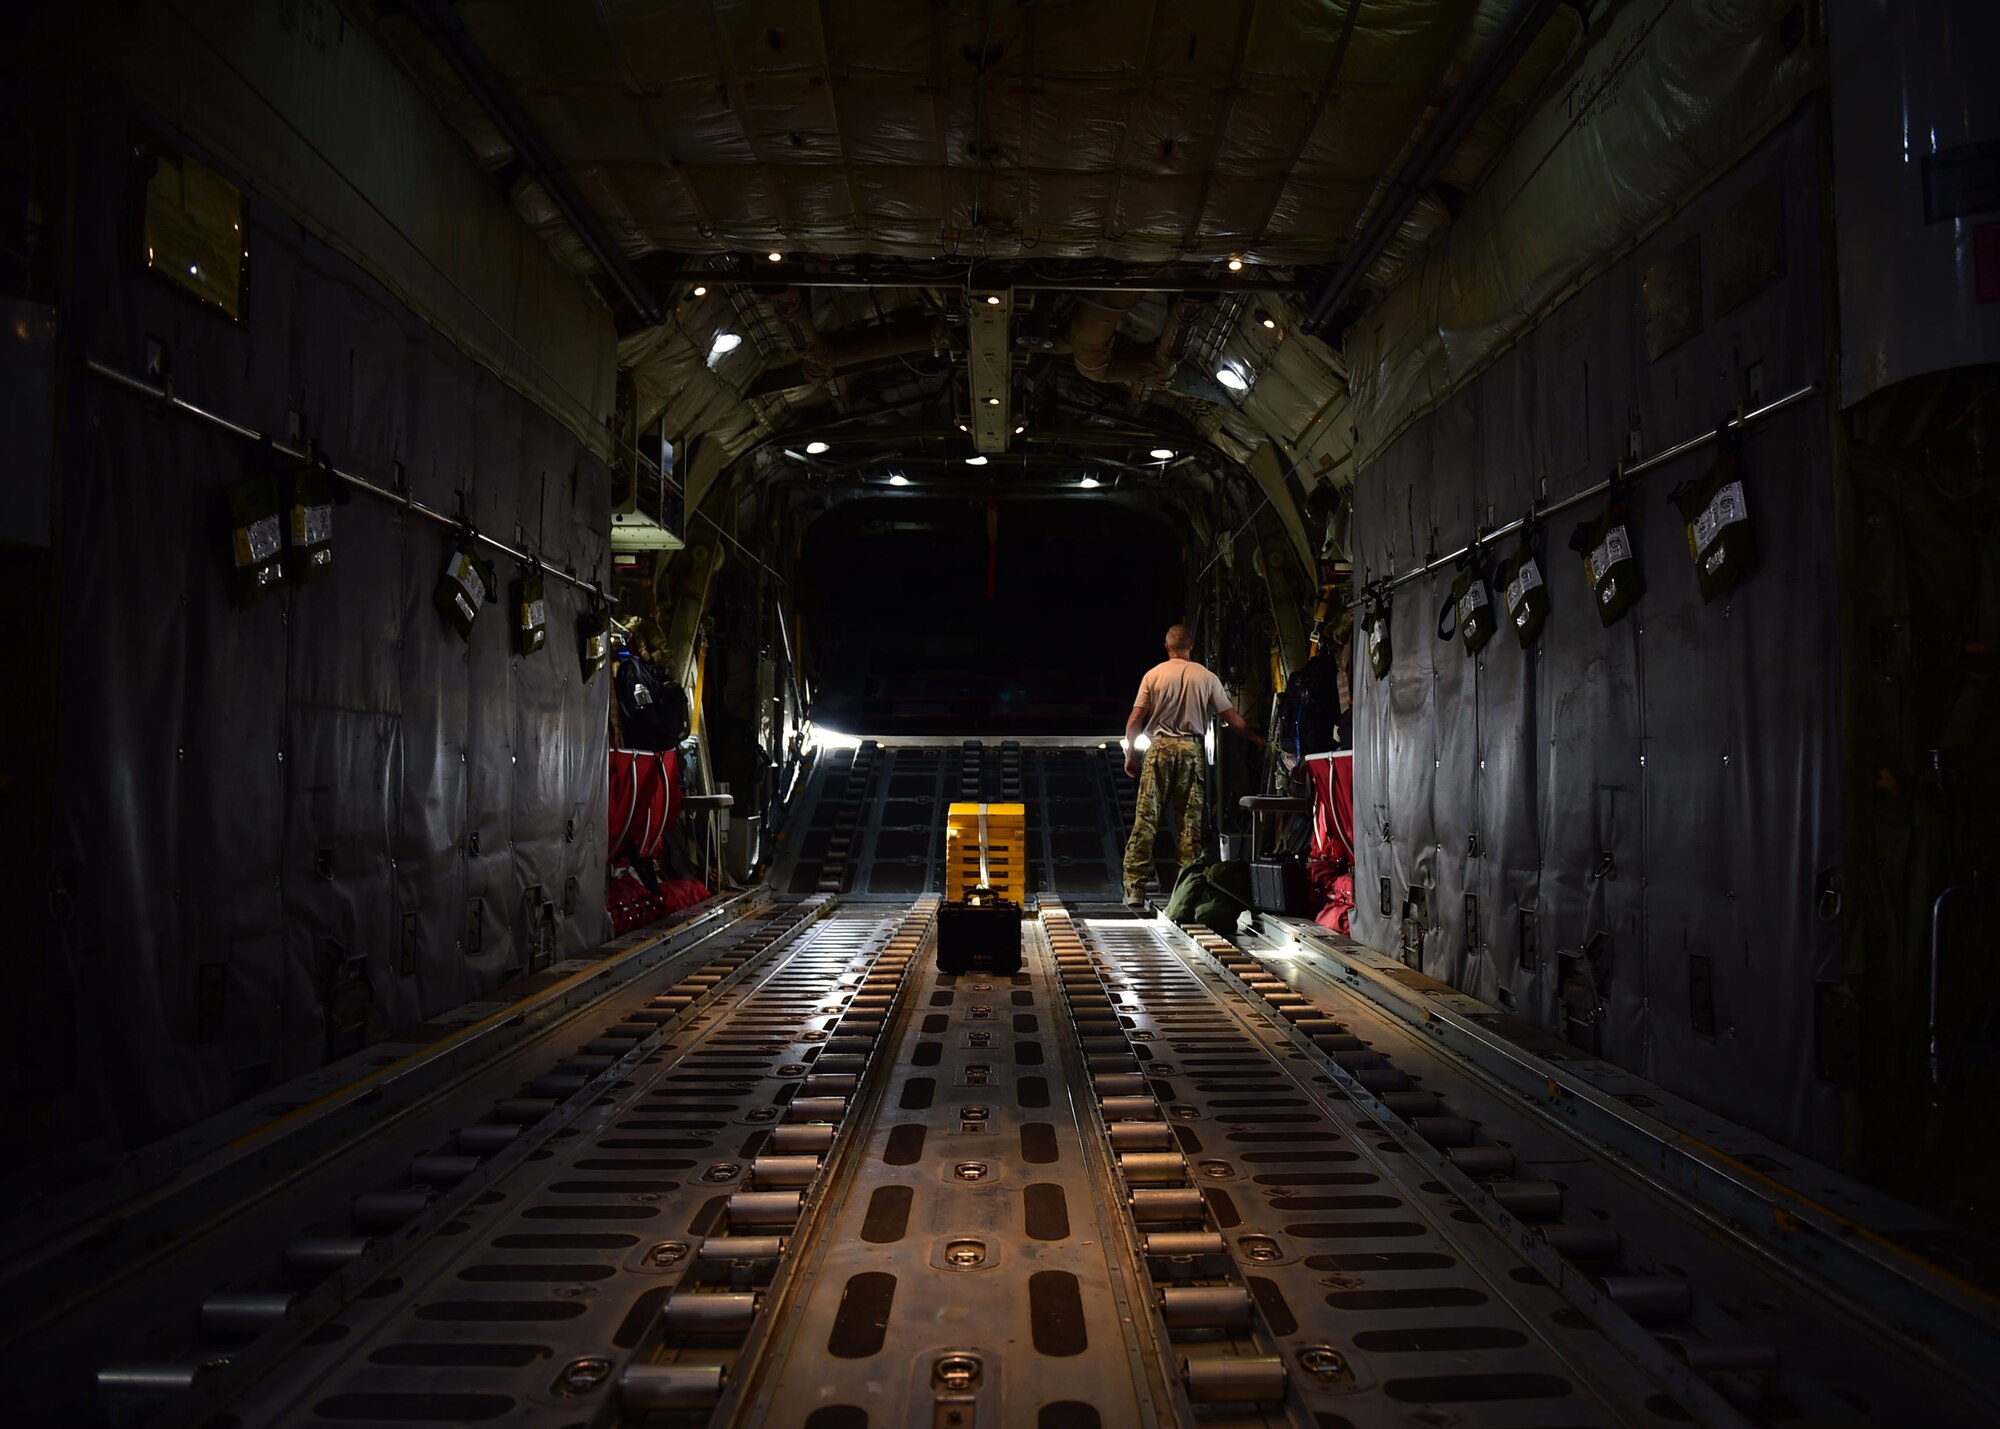 Chief Master Sgt. Thomas Glover, 737th Expeditionary Airlift Squadron loadmaster, opens the back of a C-130H Hercules at an undisclosed location in Southwest Asia, Oct. 27, 2015. Glover is one of nearly one hundred members from the 192nd Airlift Squadron based out of Reno, Nevada who are deployed in support of Operation INHERENT RESOLVE. (U.S. Air Force photo by Staff Sgt. Jerilyn Quintanilla)